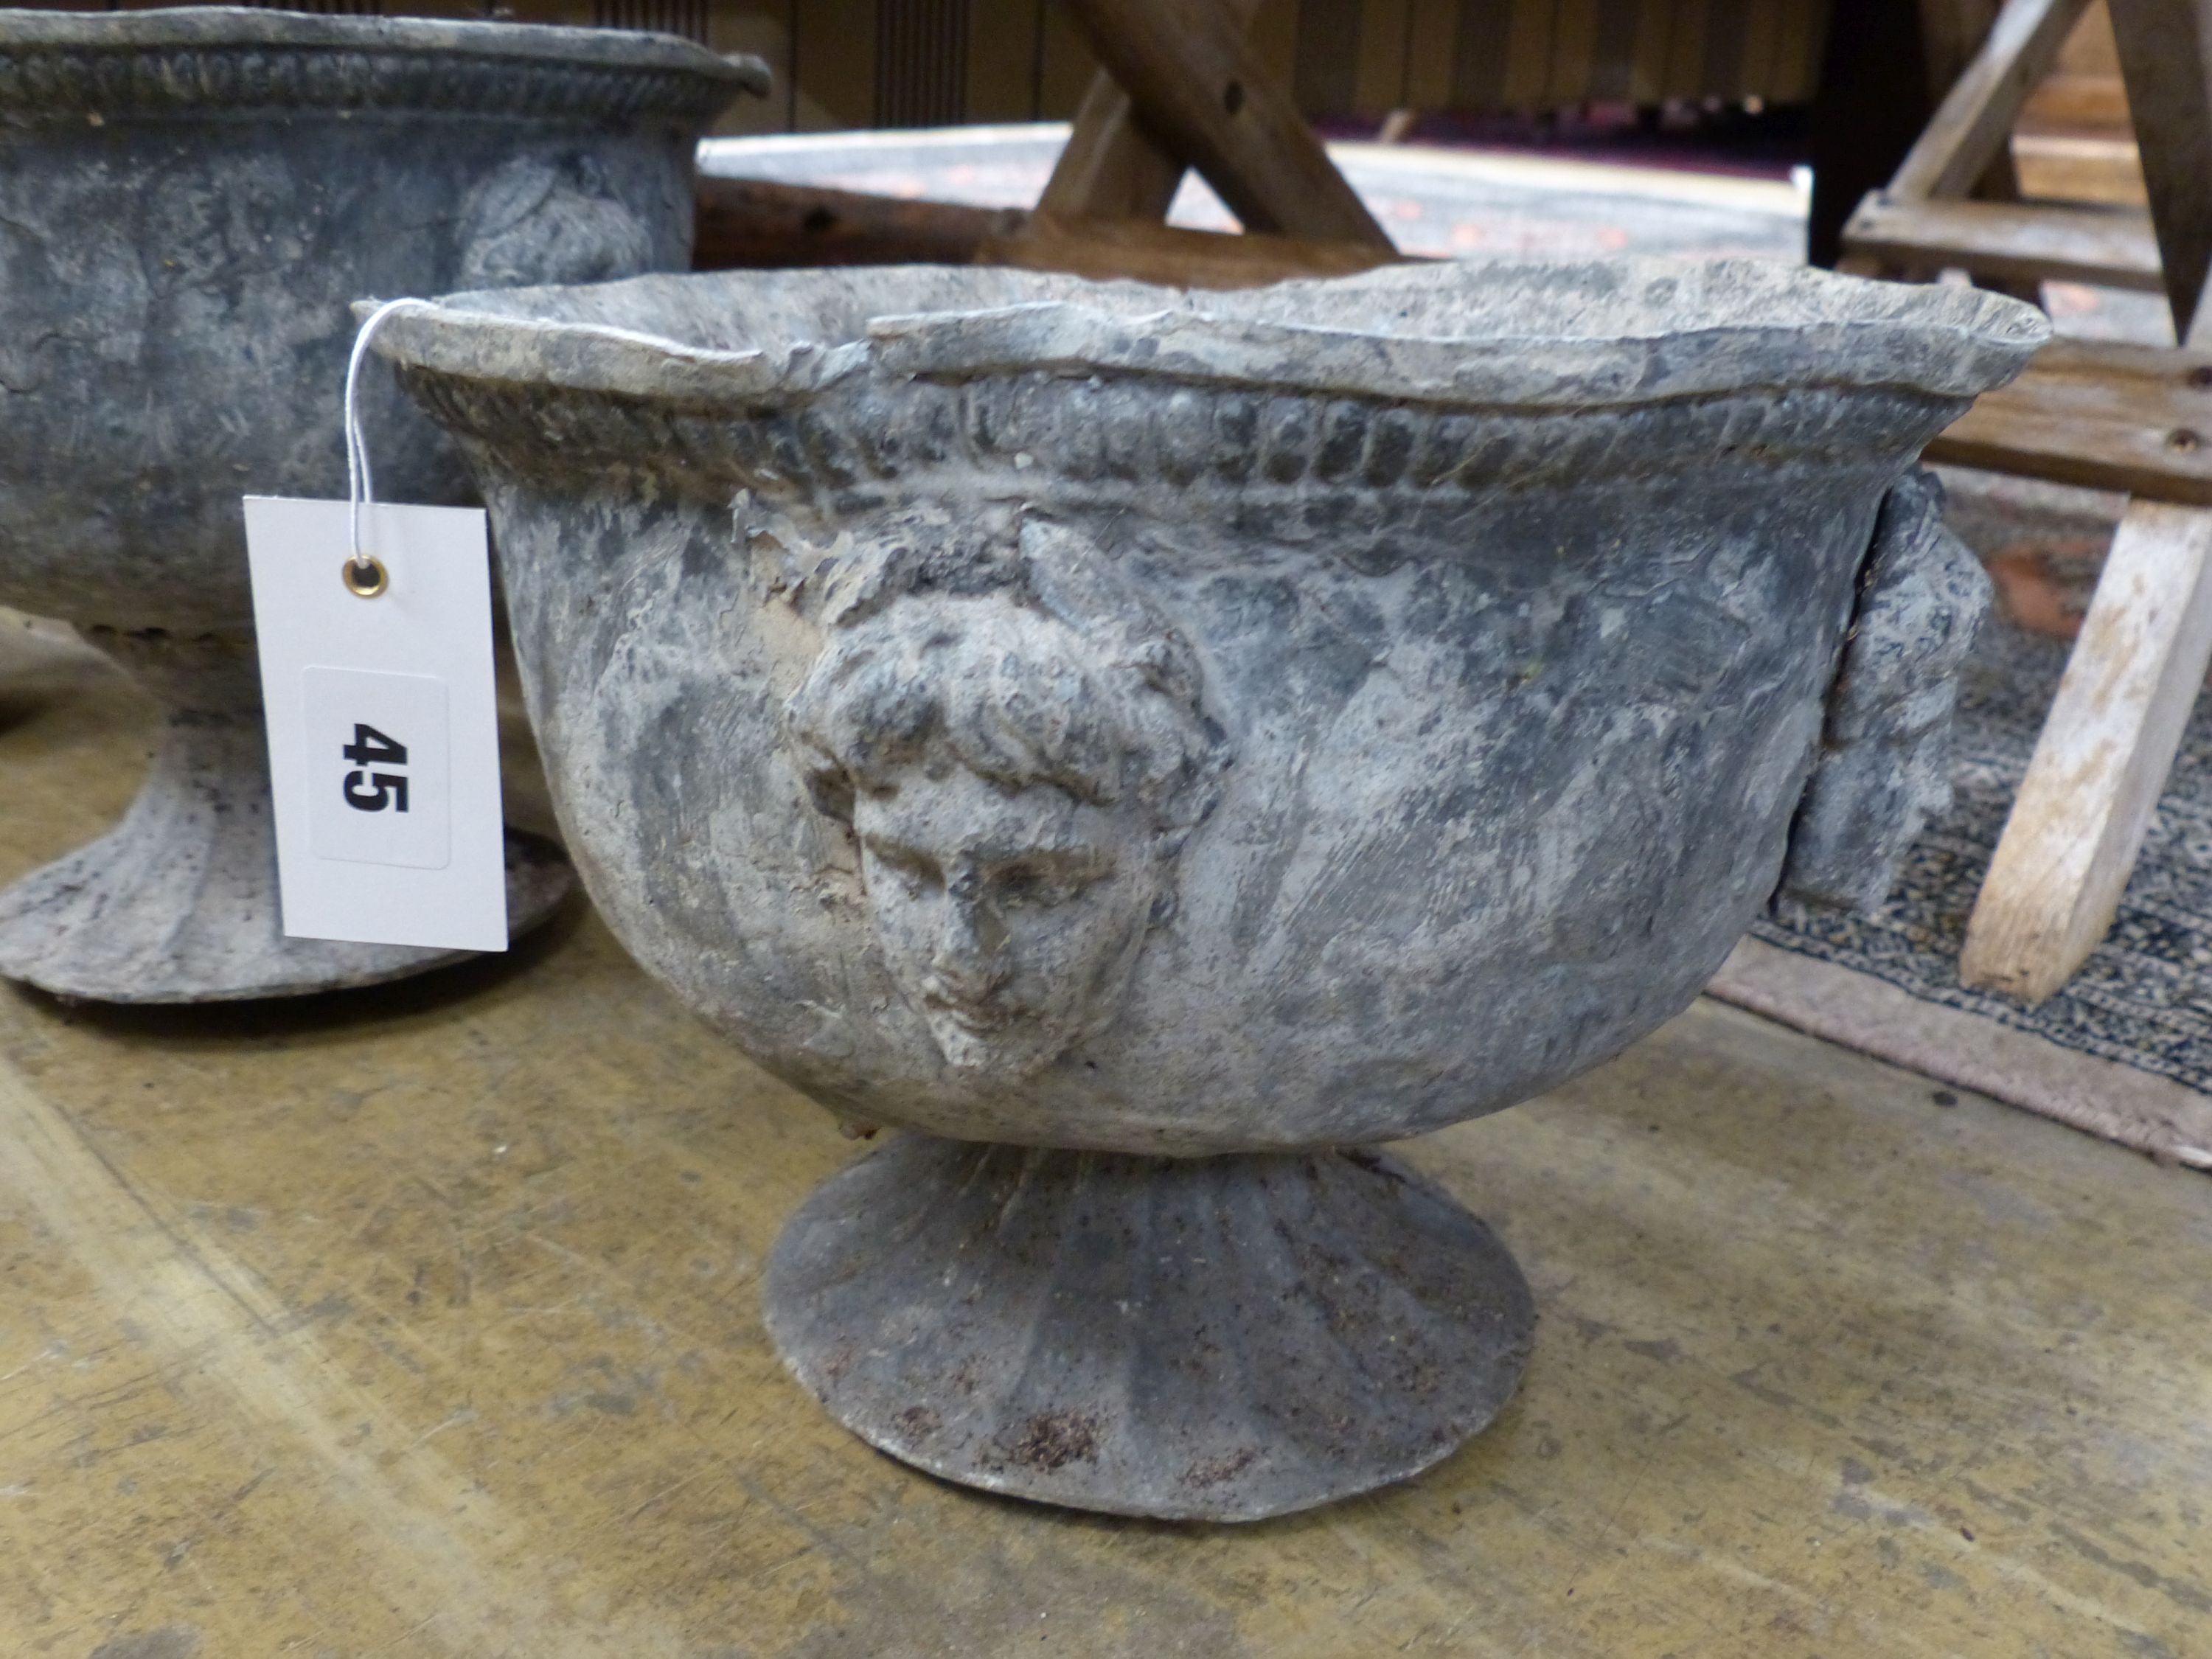 A pair of early 20th century lead garden urns, diameter 26cm, height 23cm